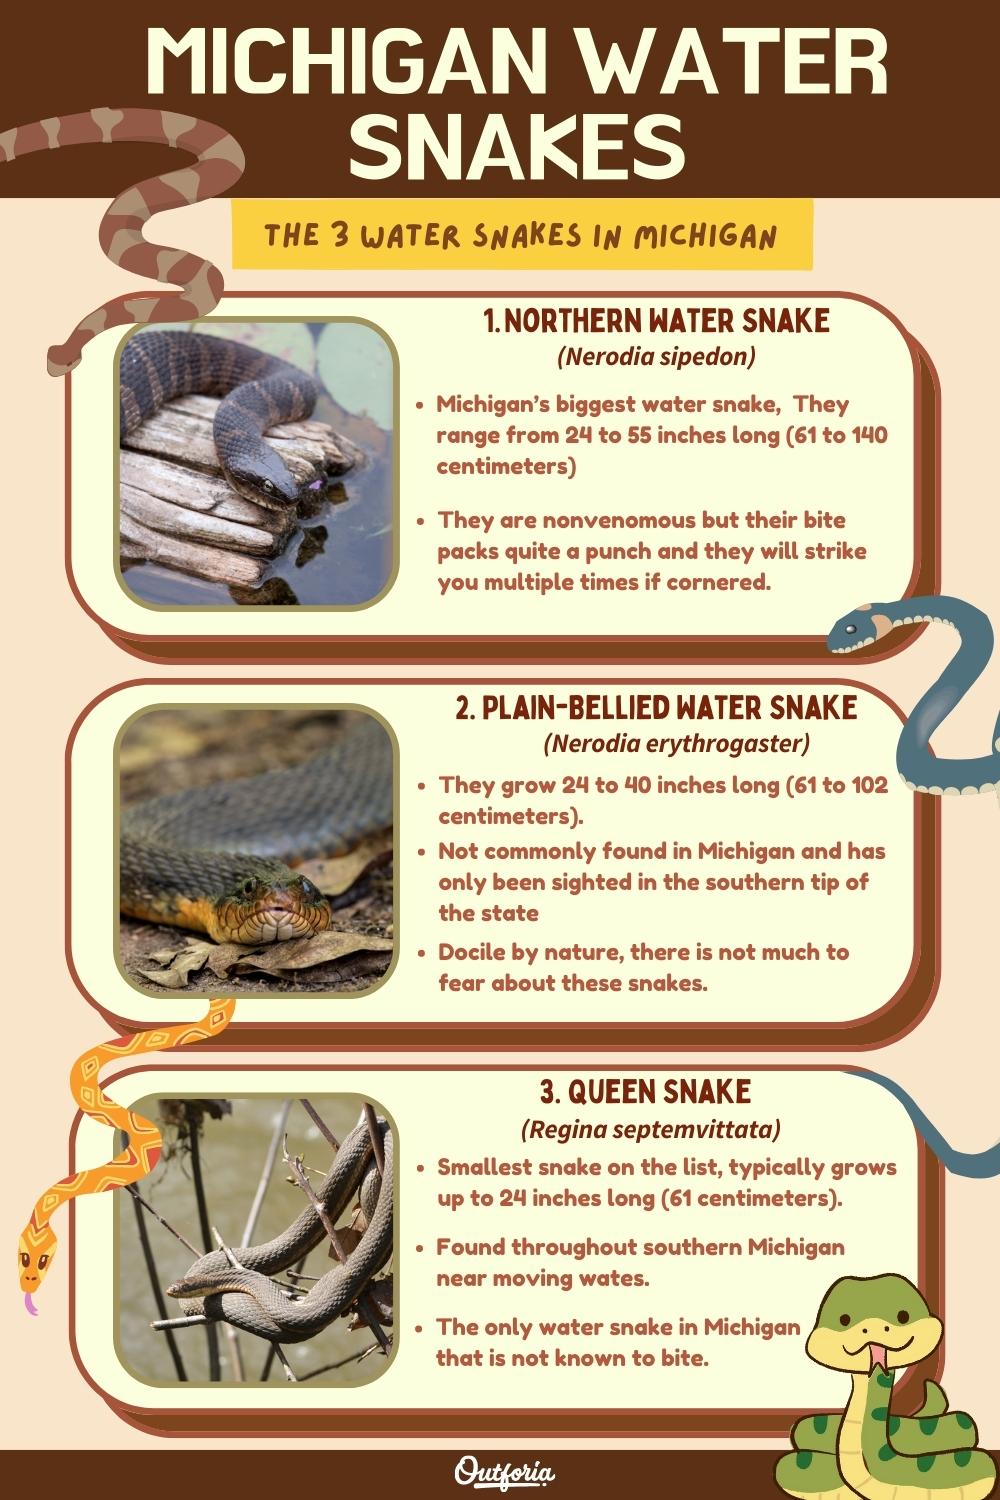 chart of the 3 Michigan water snakes with names, images, and brief descriptions